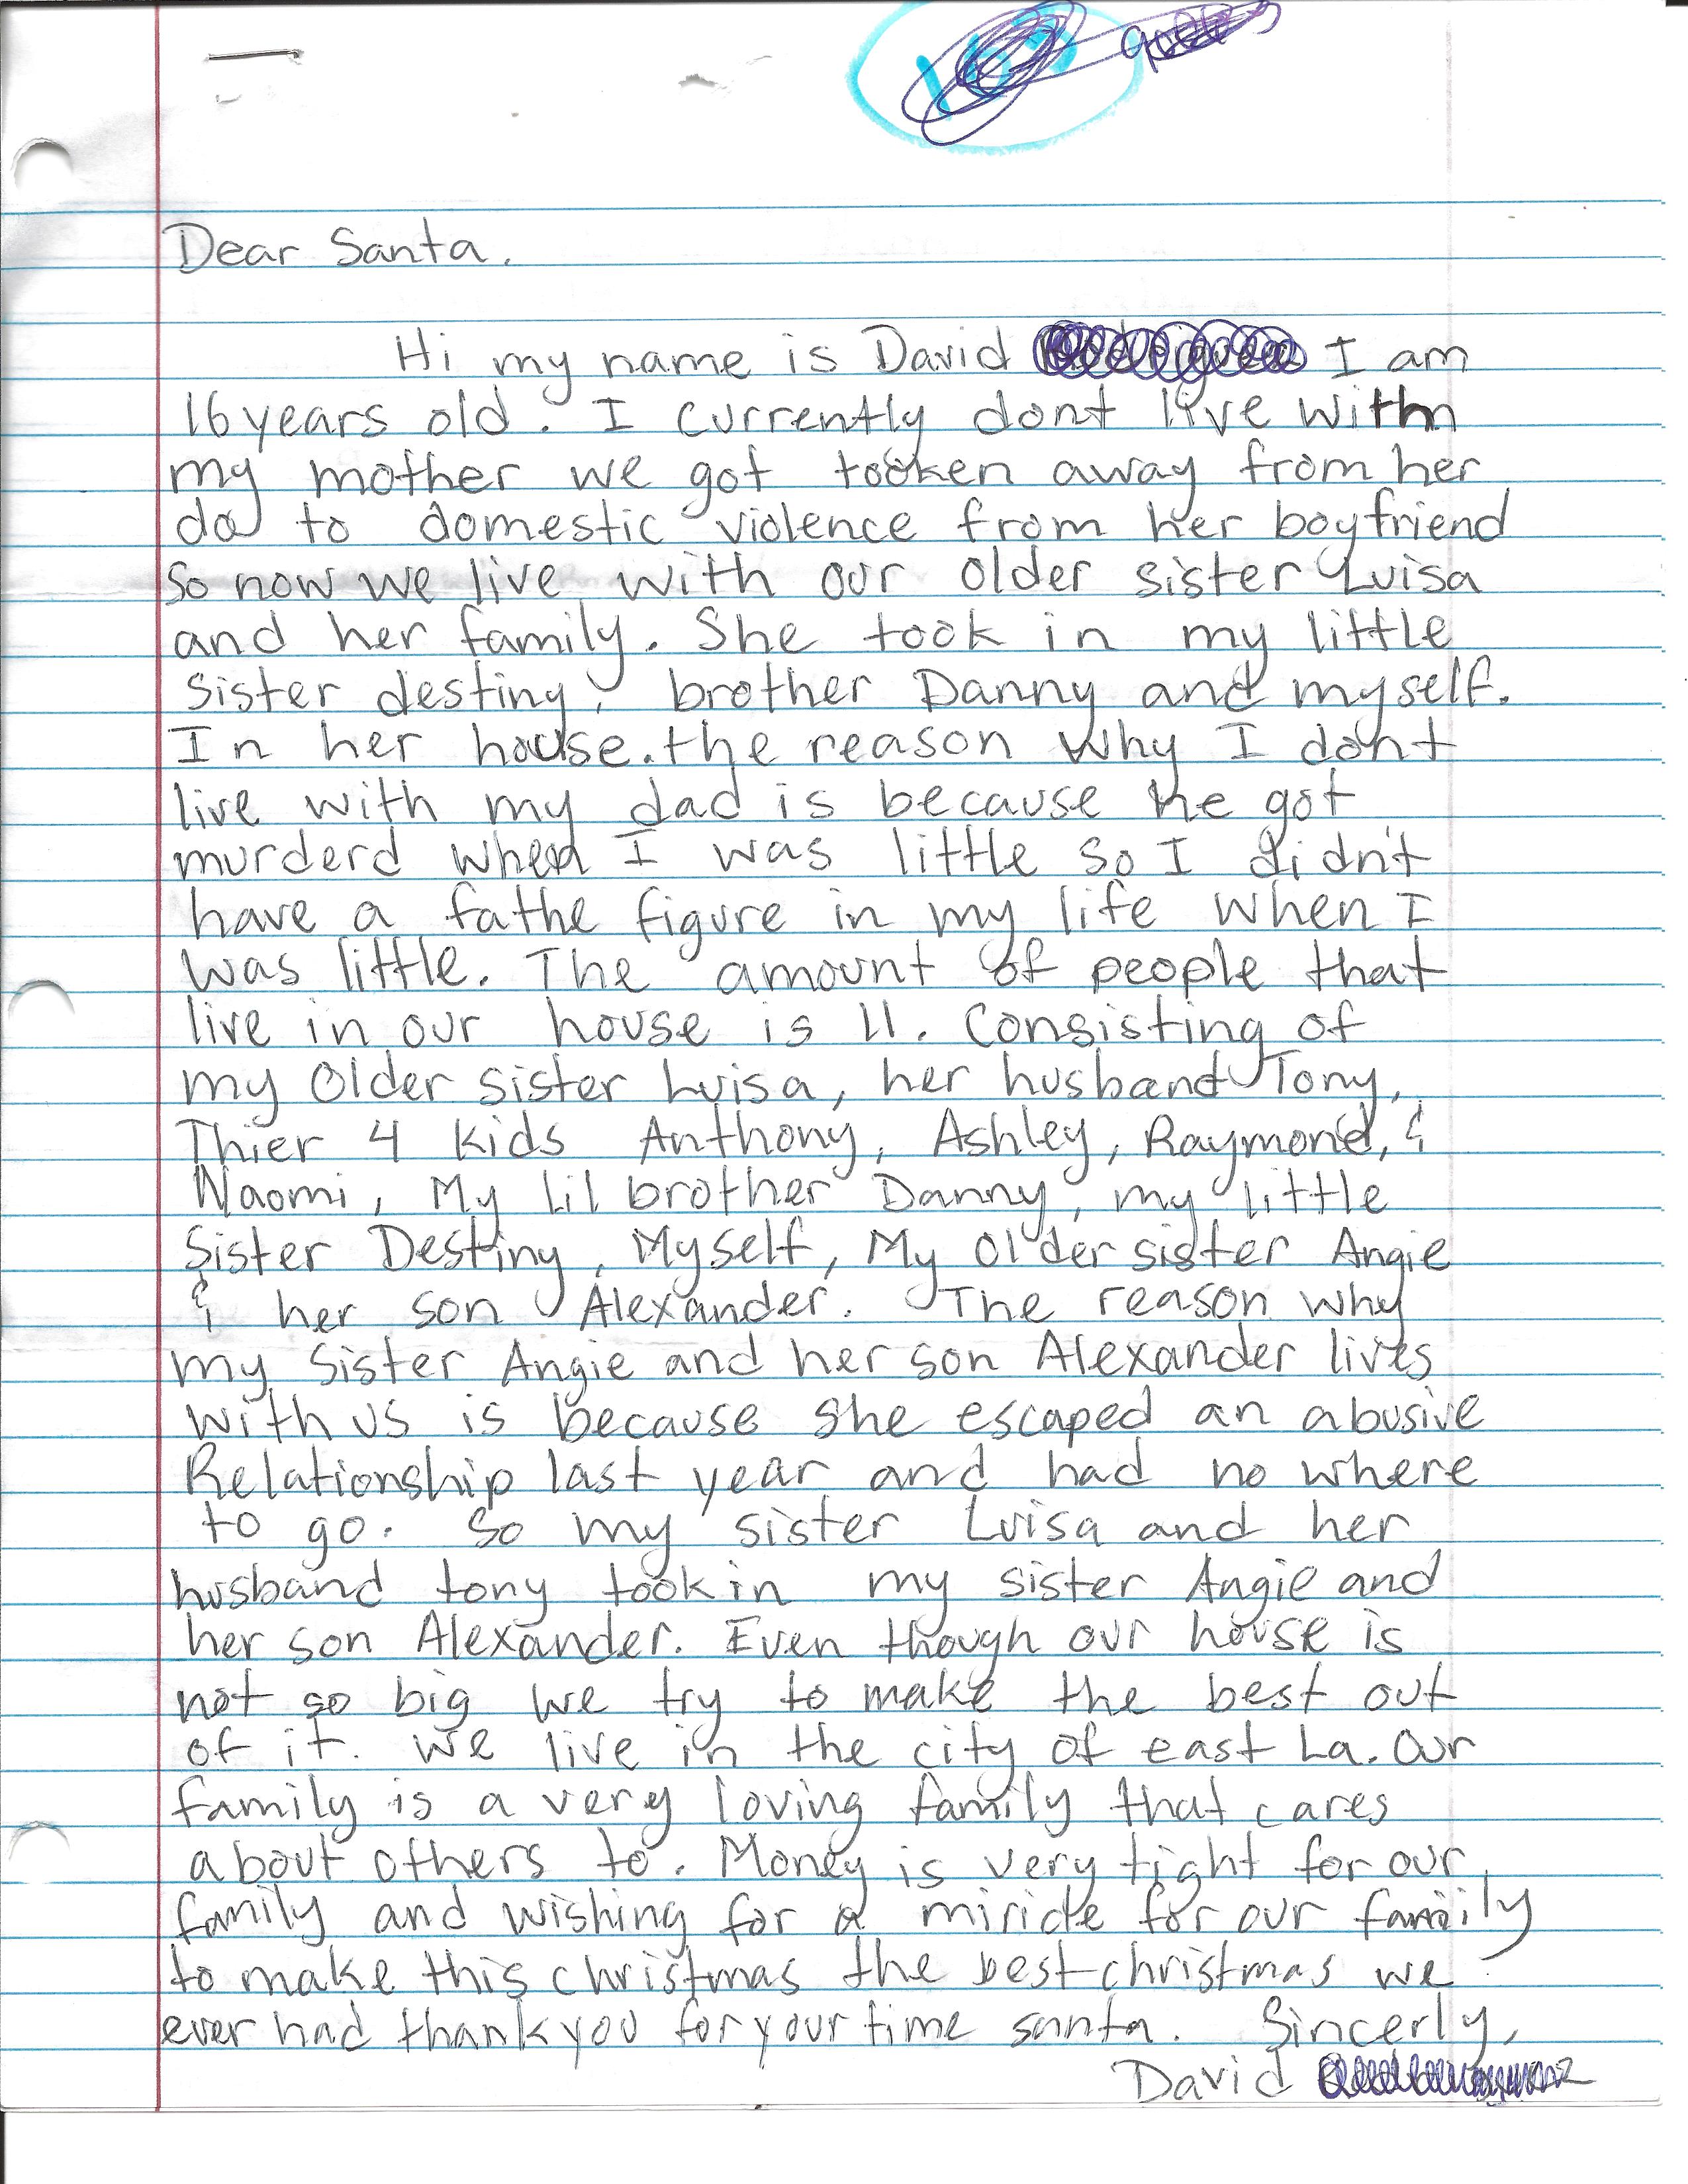 This moving letter was chosen for adoption by a BeAnElf.org volunteer.